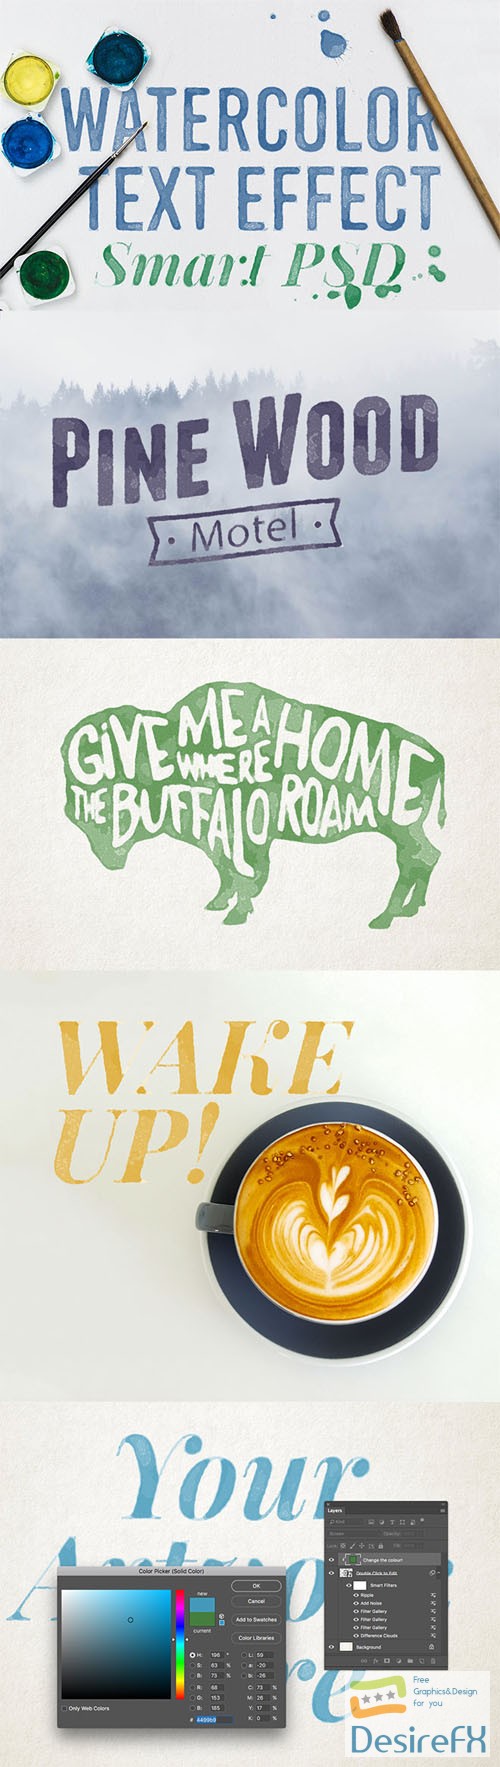 Watercolour Text Effect Smart PSD for Adobe Photoshop